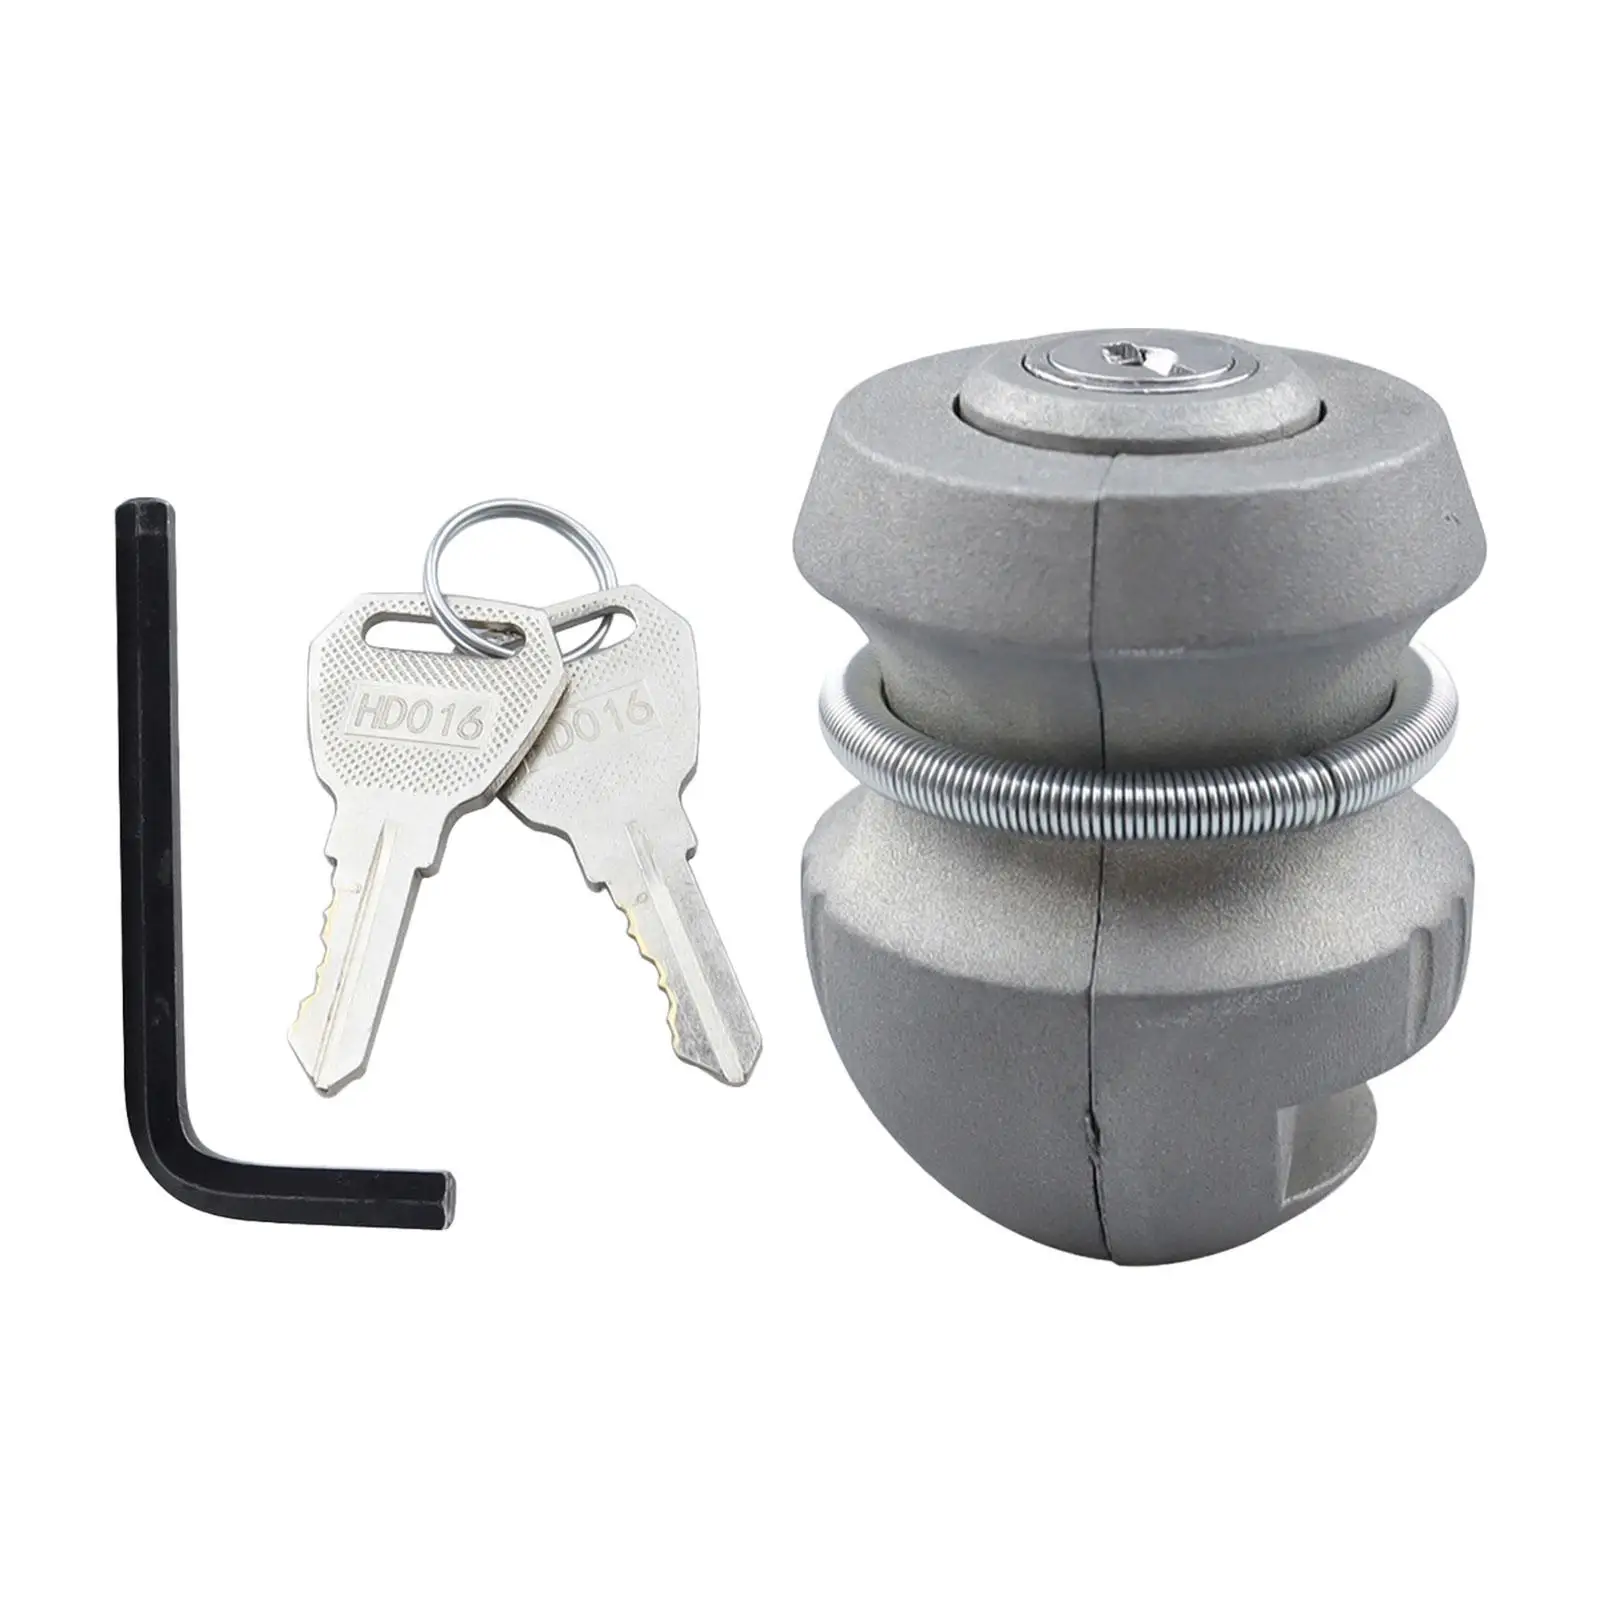 Trailer Part Coupling Lock Metal Trailer Lock Practical Tow Anti Lost Device for High Performance Durable Premium